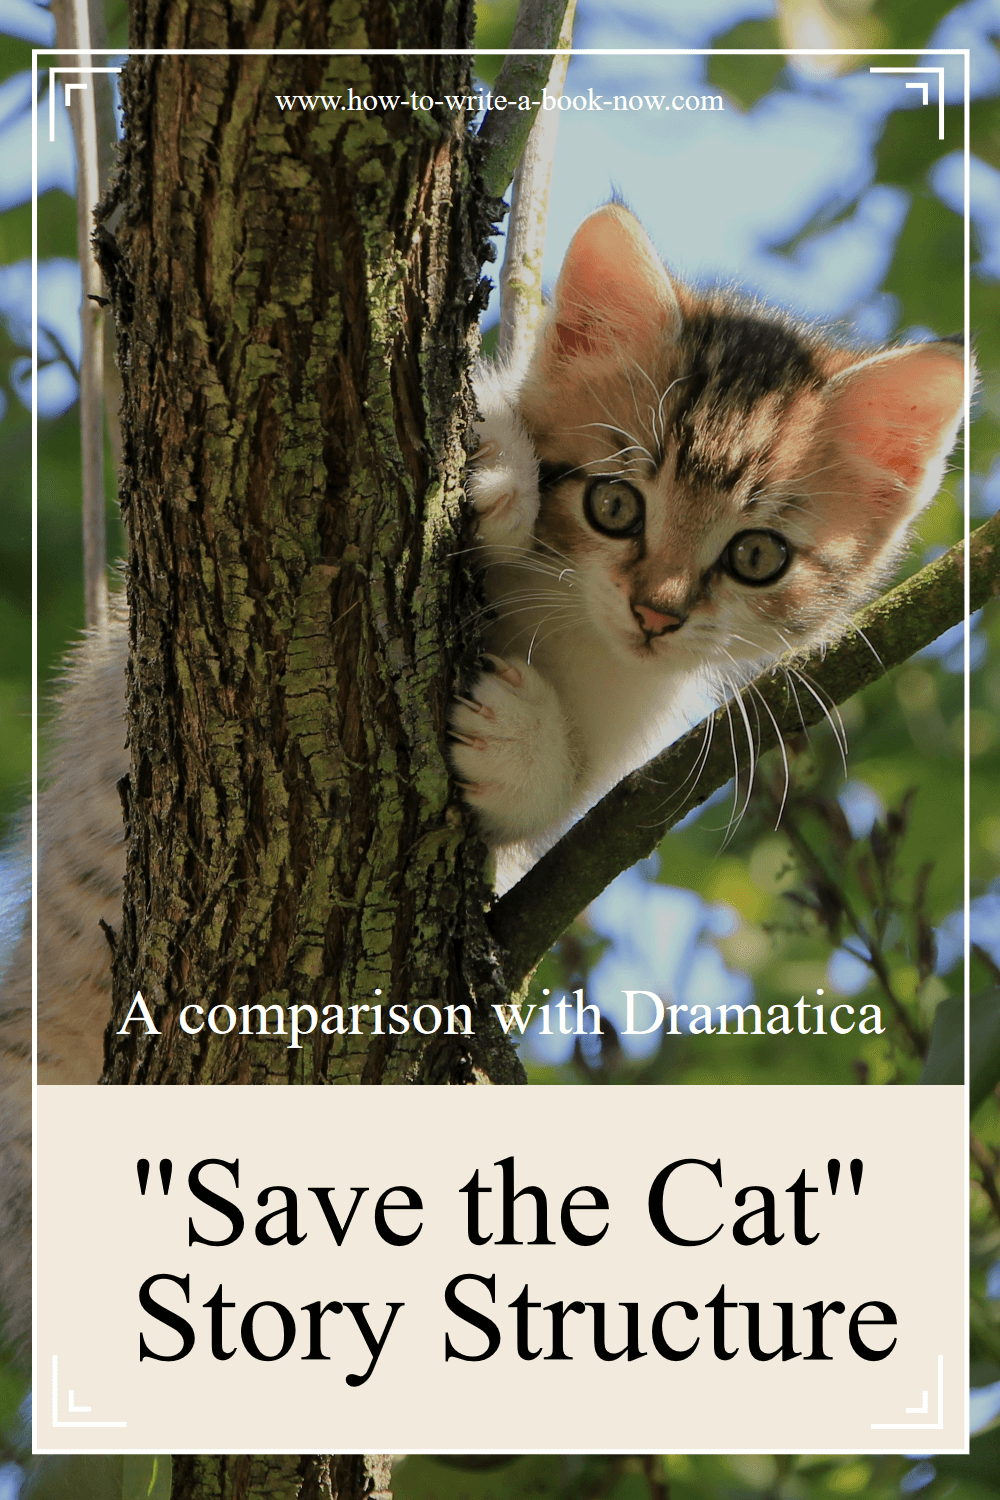 Save the Cat Story Structure